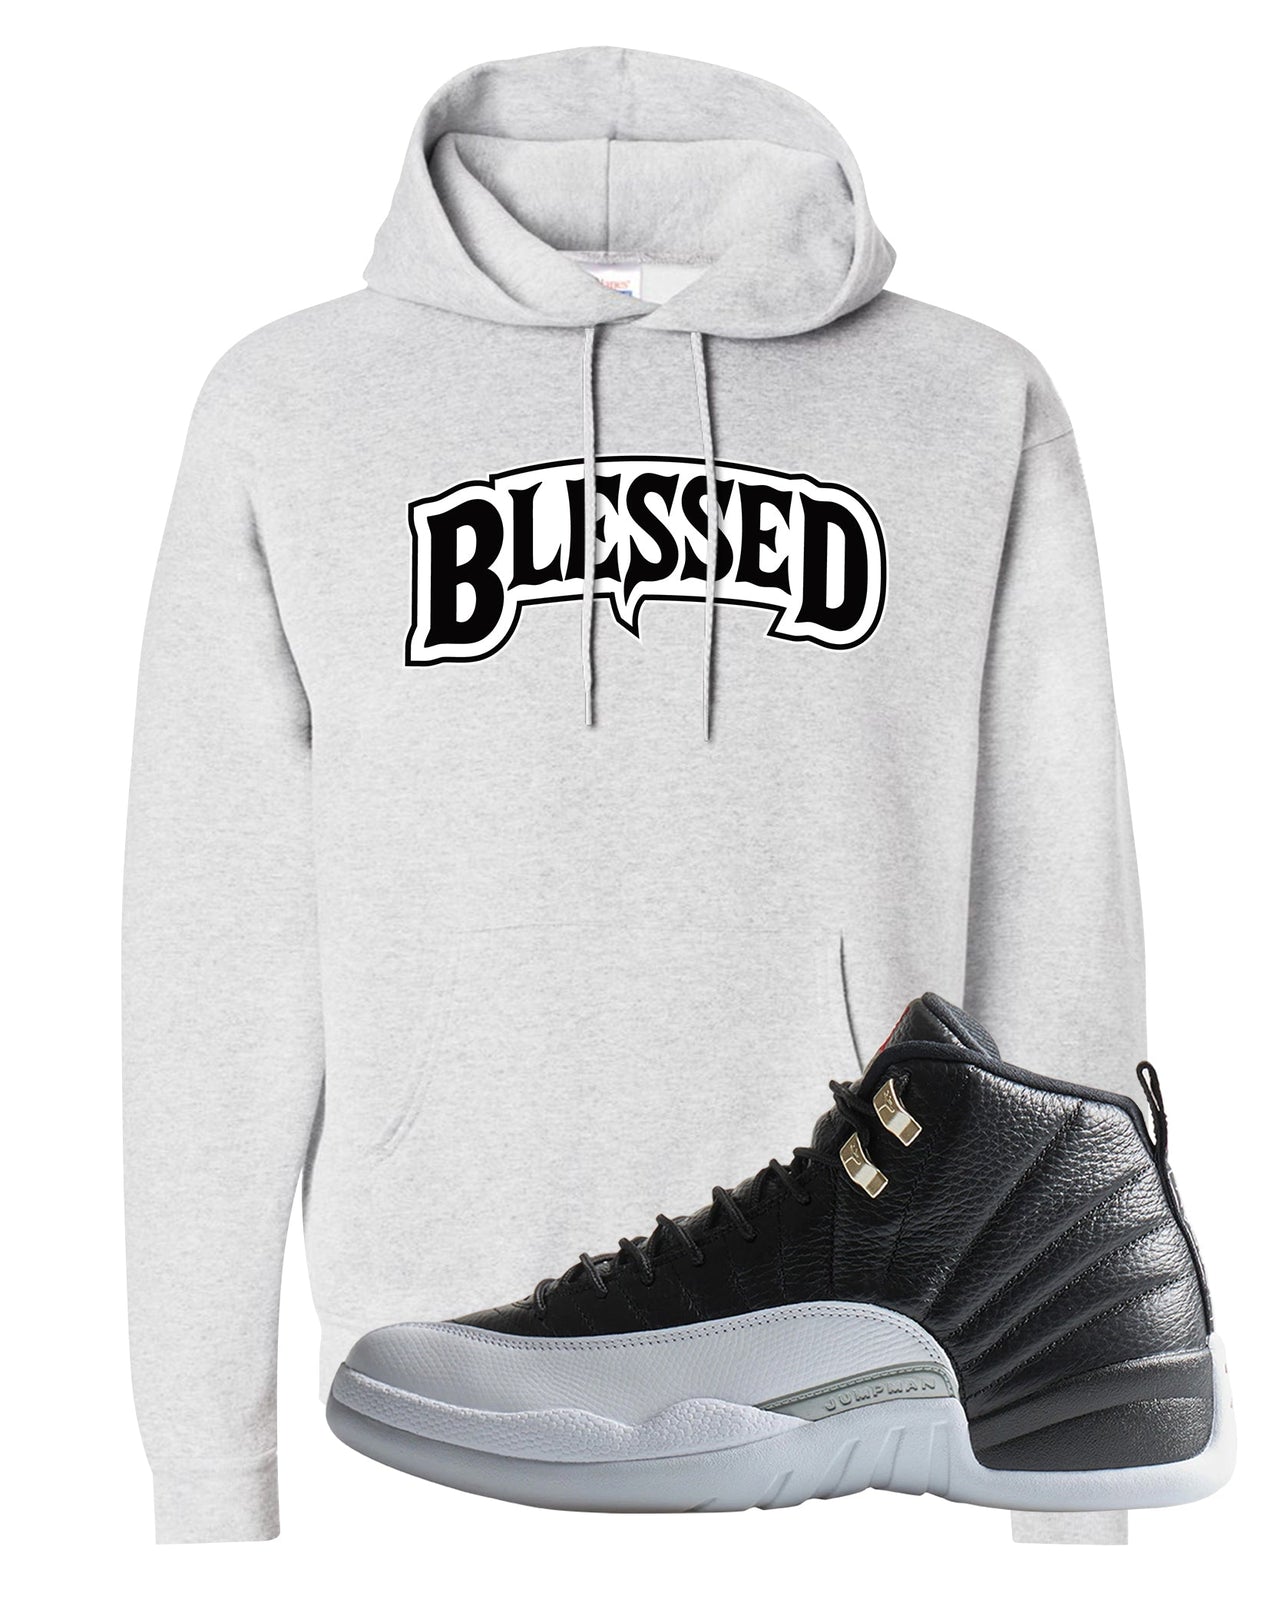 Playoff 12s Hoodie | Blessed Arch, Ash